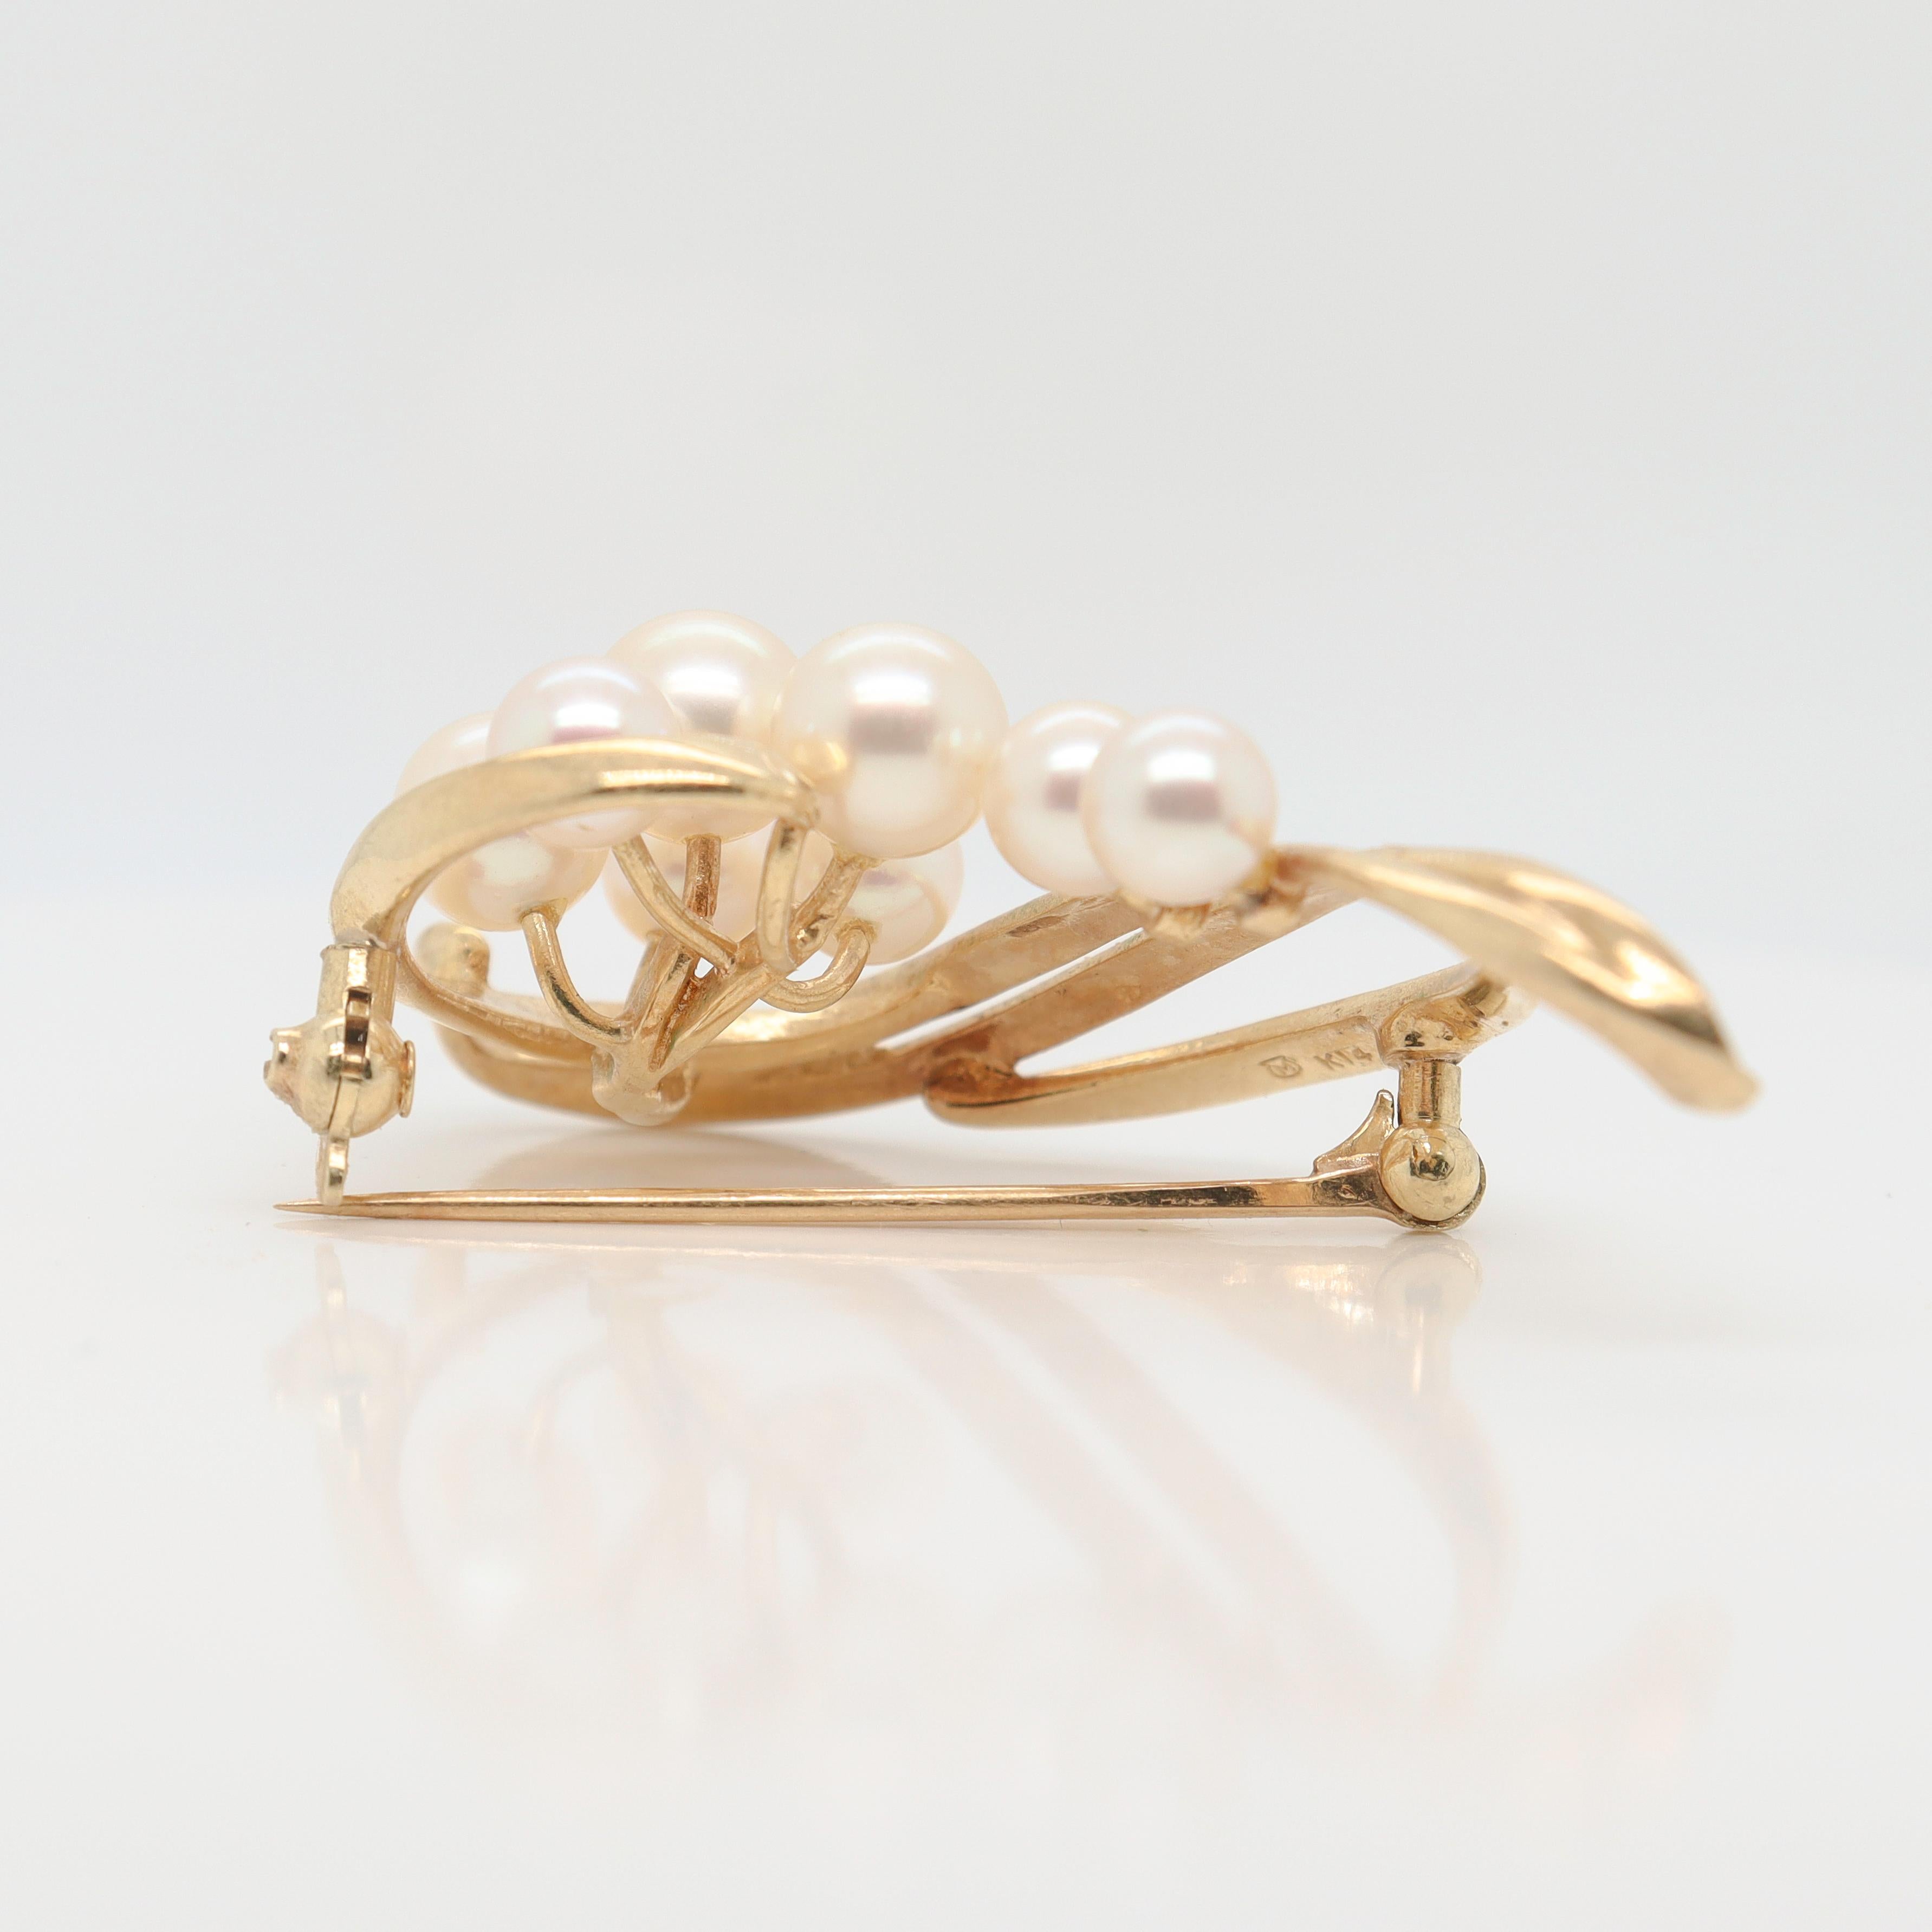 Mikimoto Modernist 14k Gold & Akoya Pearl Brooch or Pin In Good Condition For Sale In Philadelphia, PA